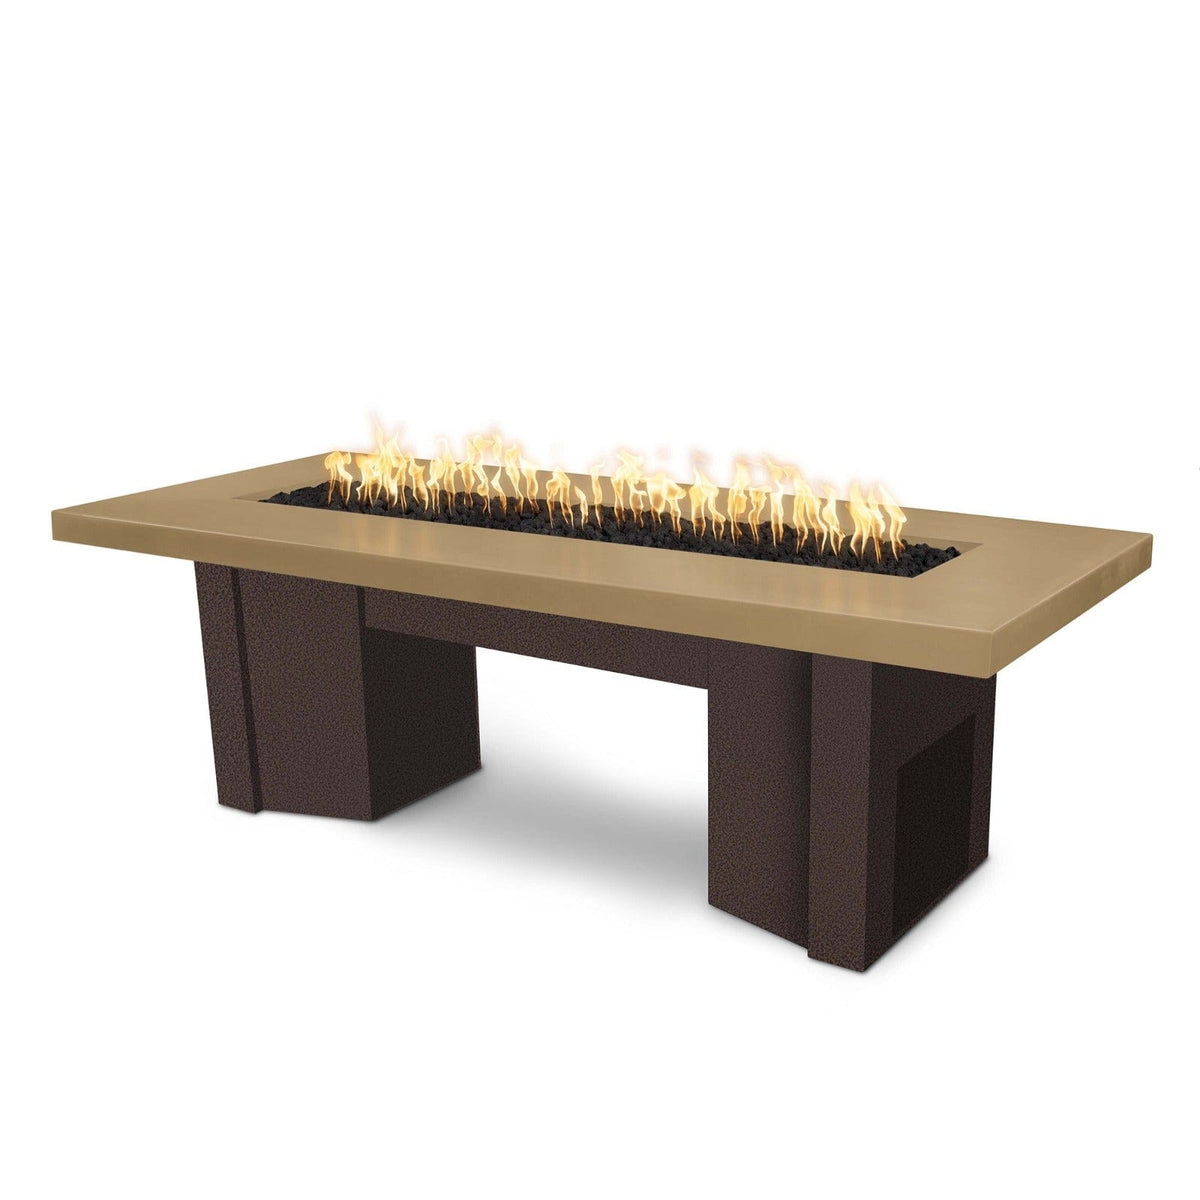 The Outdoor Plus Fire Features Brown (-BRN) / Copper Vein Powder Coated Steel (-CPV) The Outdoor Plus 60&quot; Alameda Fire Table Smooth Concrete in Natural Gas - Match Lit with Flame Sense System / OPT-ALMGFRC60FSML-NG